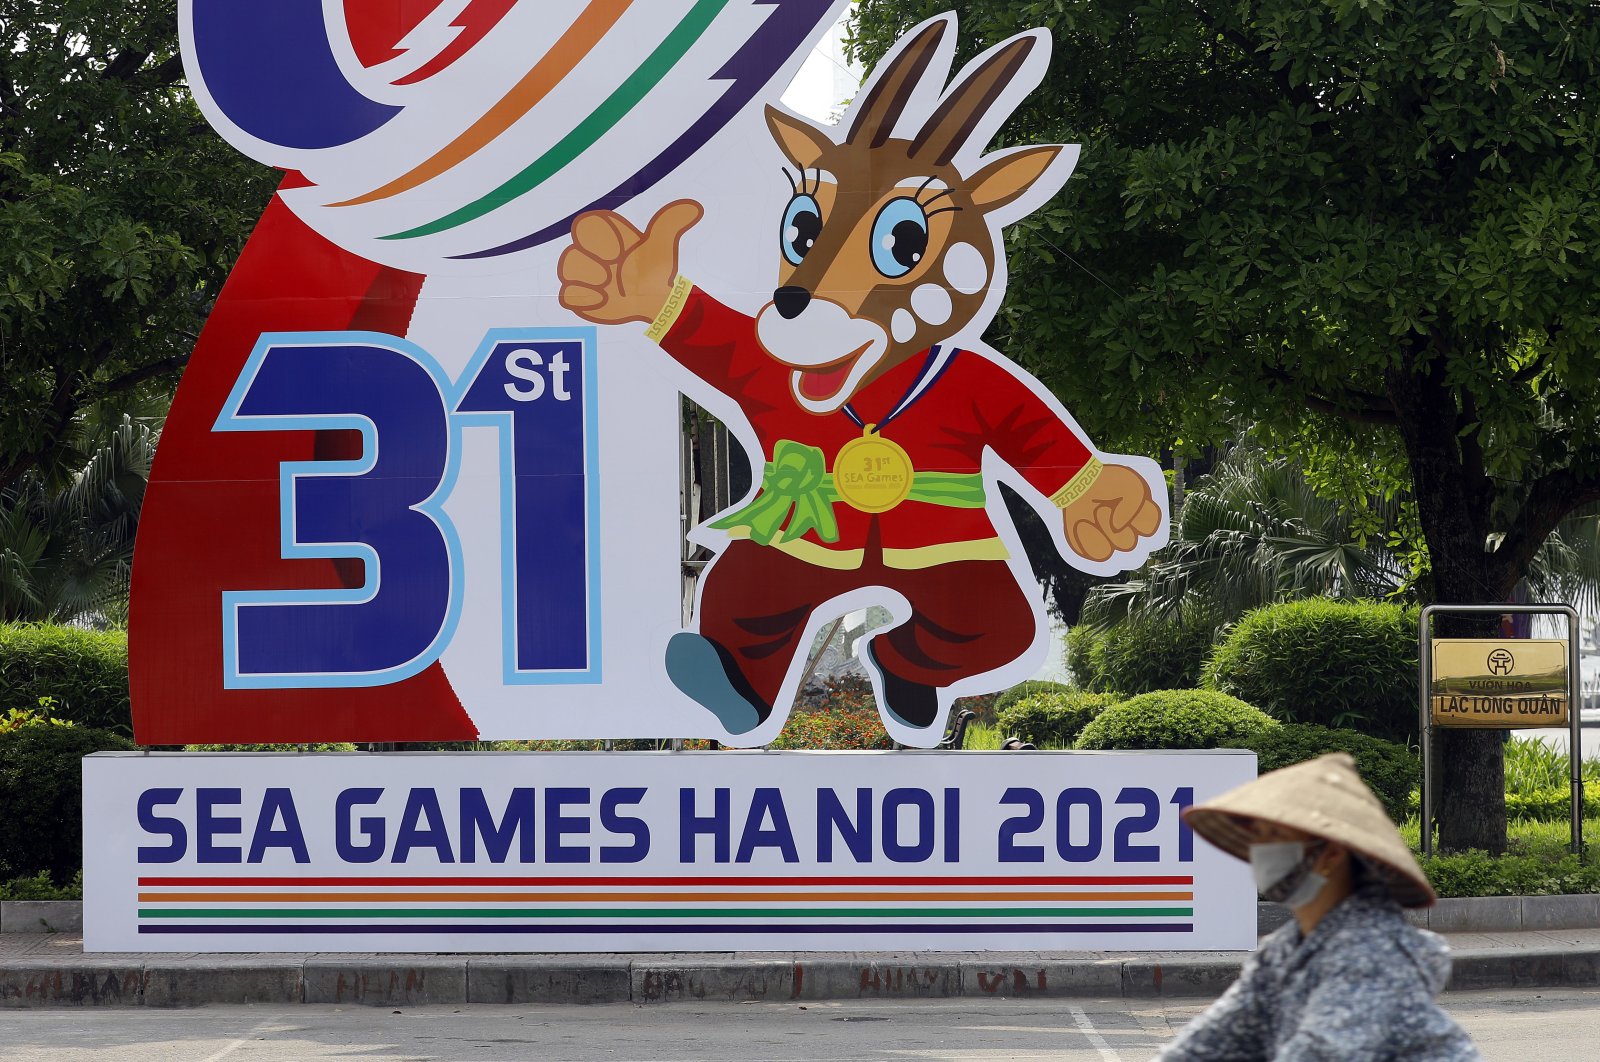 A woman rides bicycle past a banner advertising the 31st Southeast Asian Games, Hanoi, Vietnam, April 25, 2022. (EPA Photo)